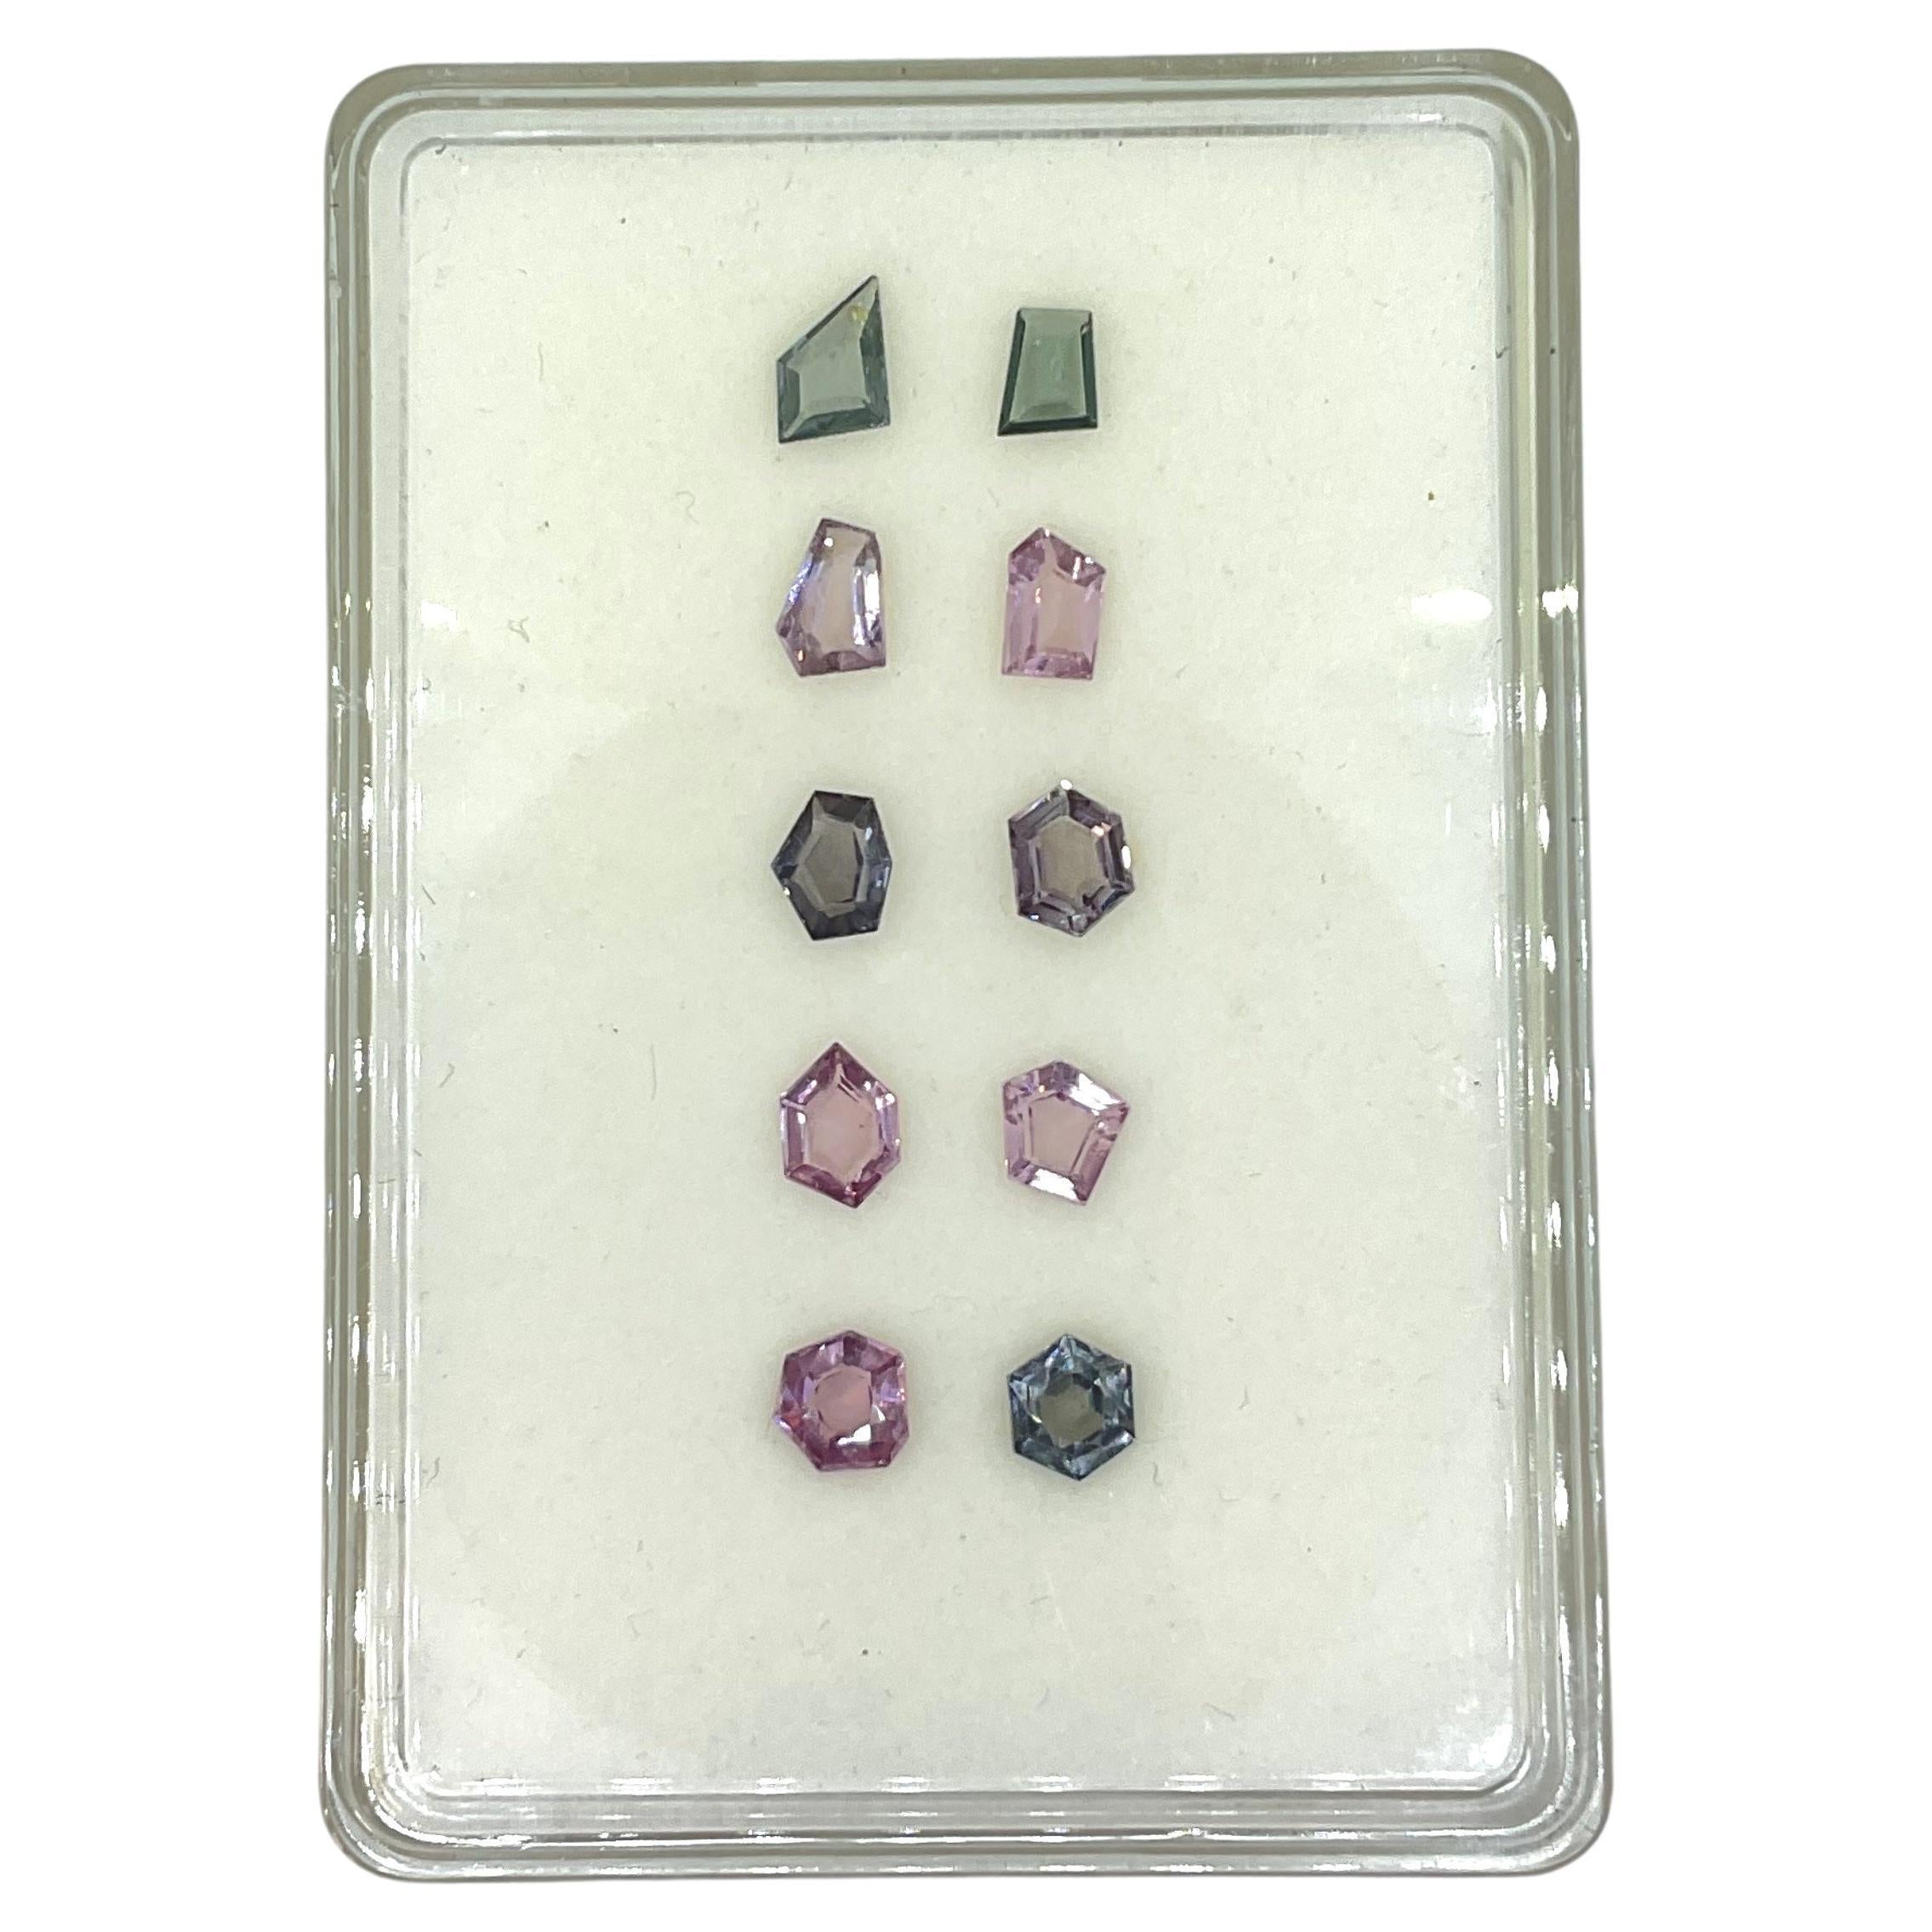 8.30 Carats Grey & Pink Spinel Fancy Cut Stone Natural Gems For earrings For Sale